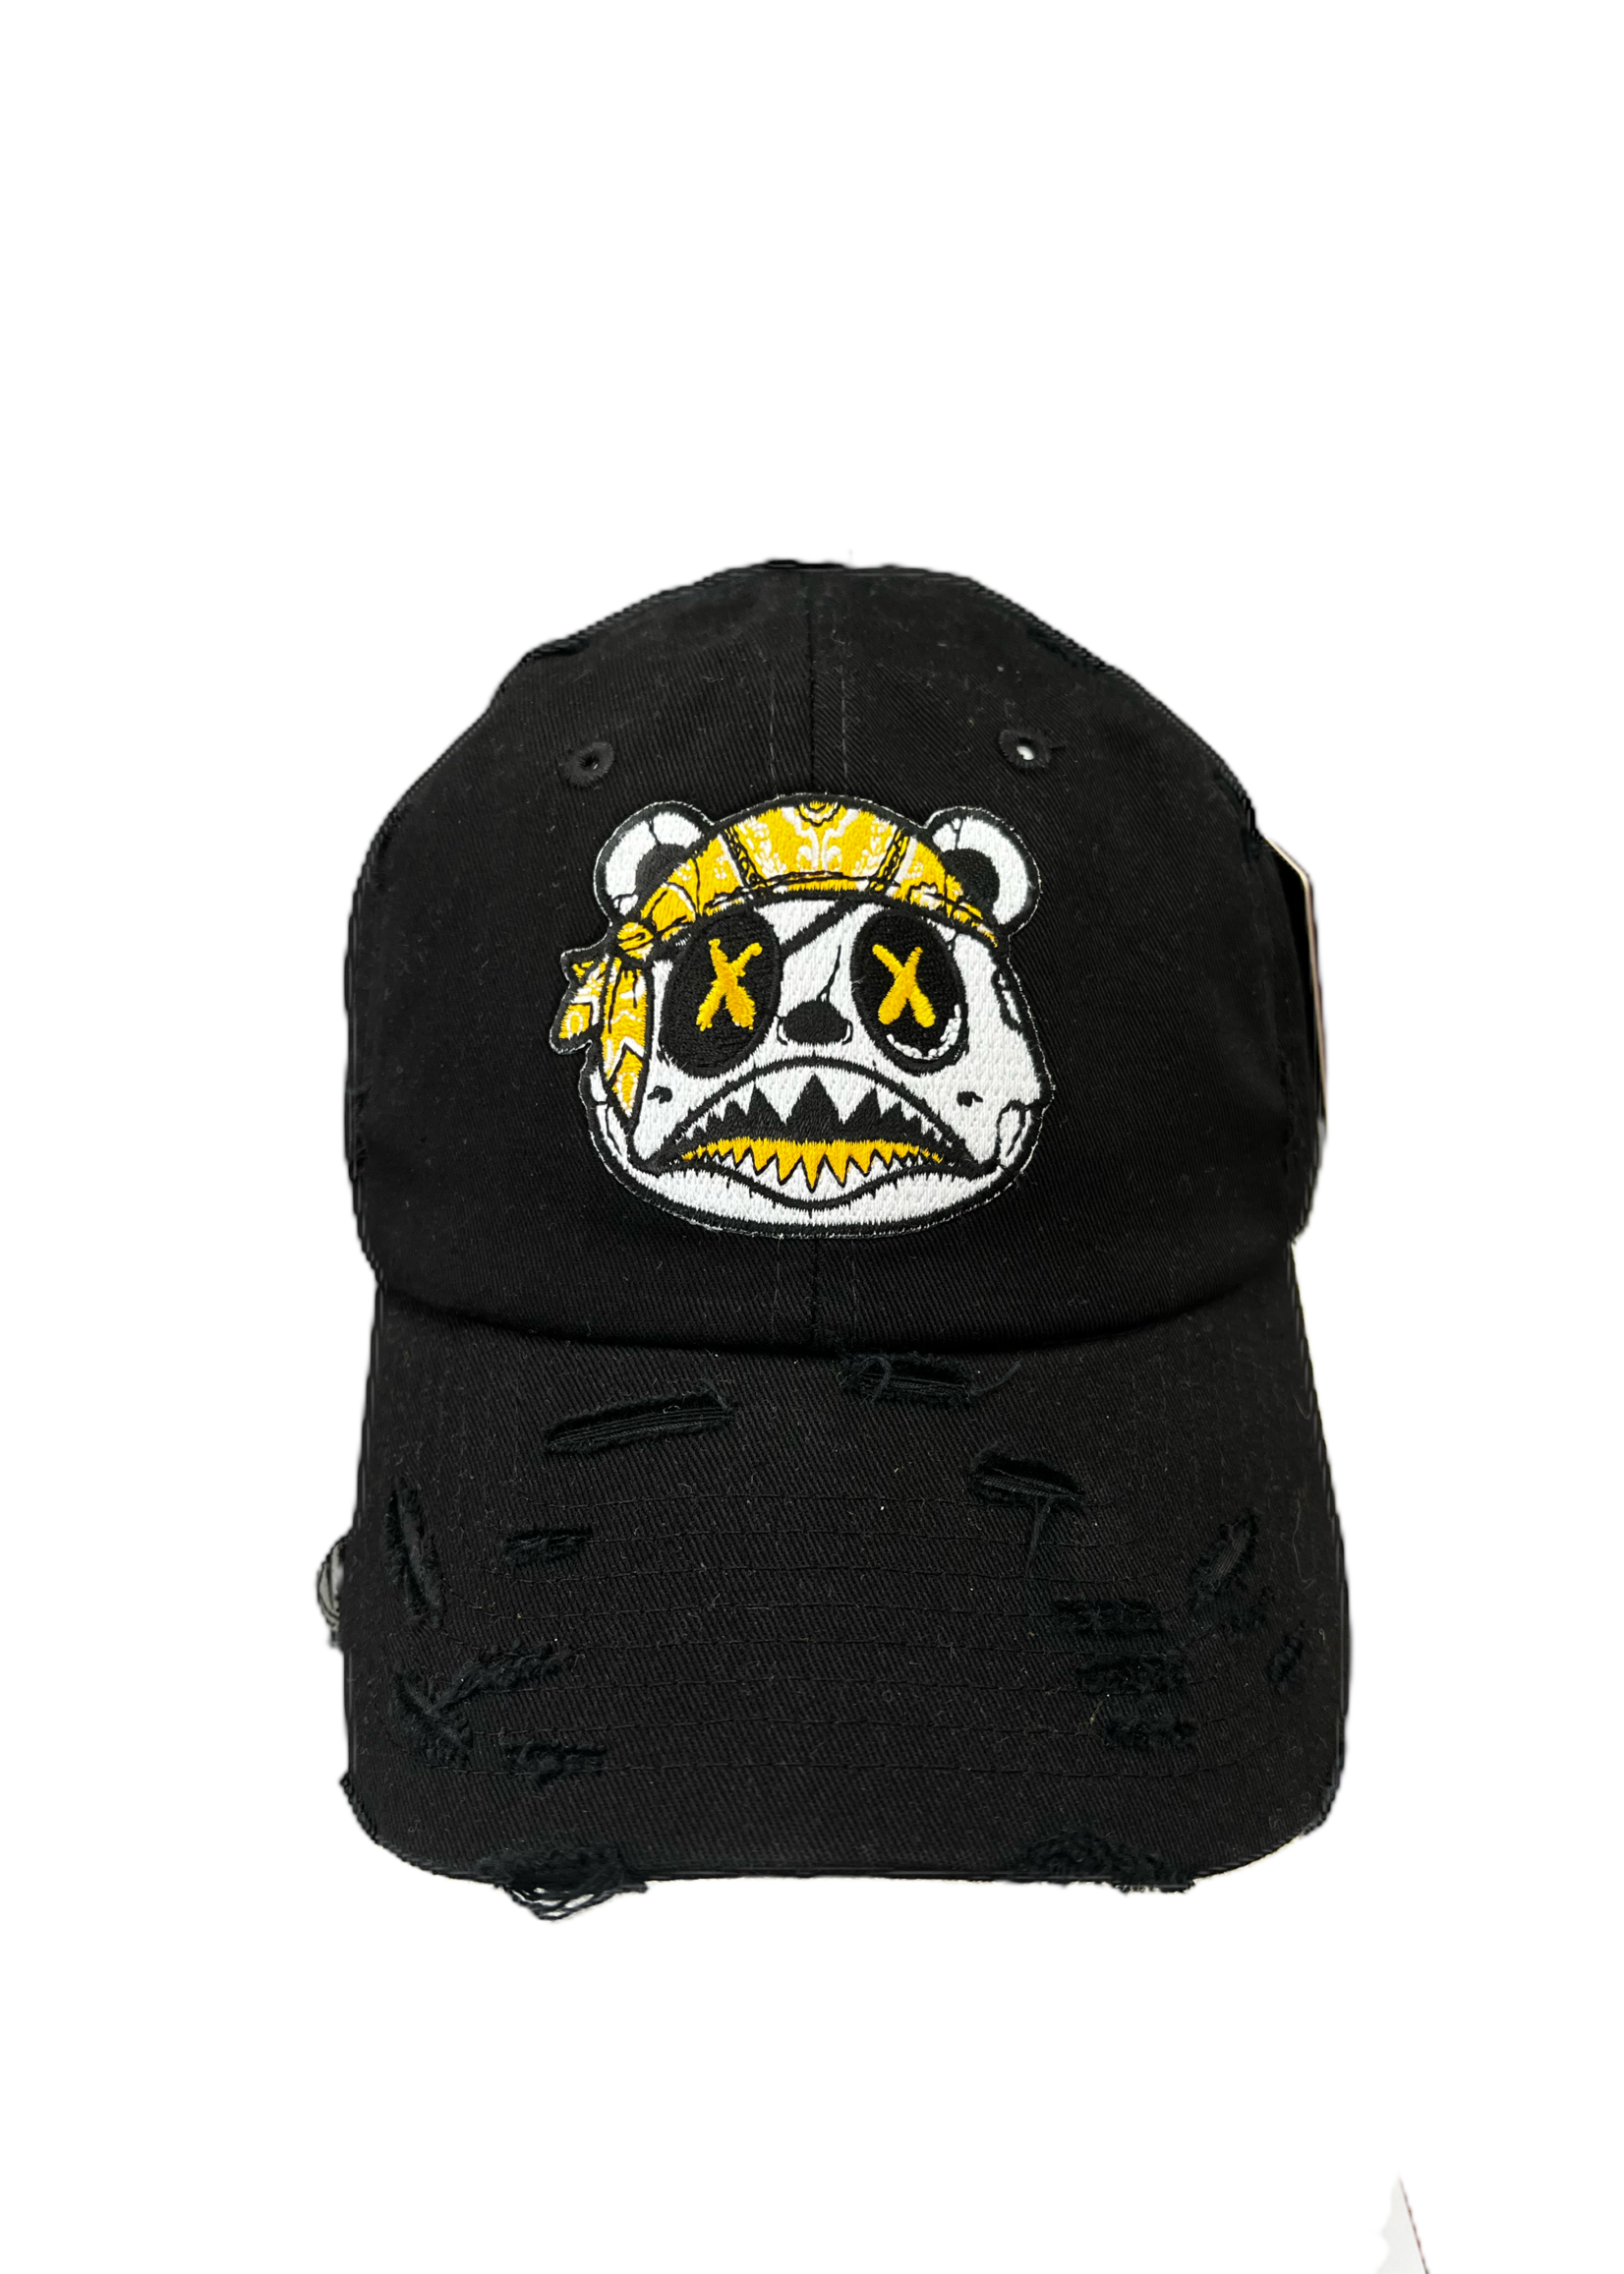 BAWS BAWS HAT (Gold/Black/White) - GOLD EDITION